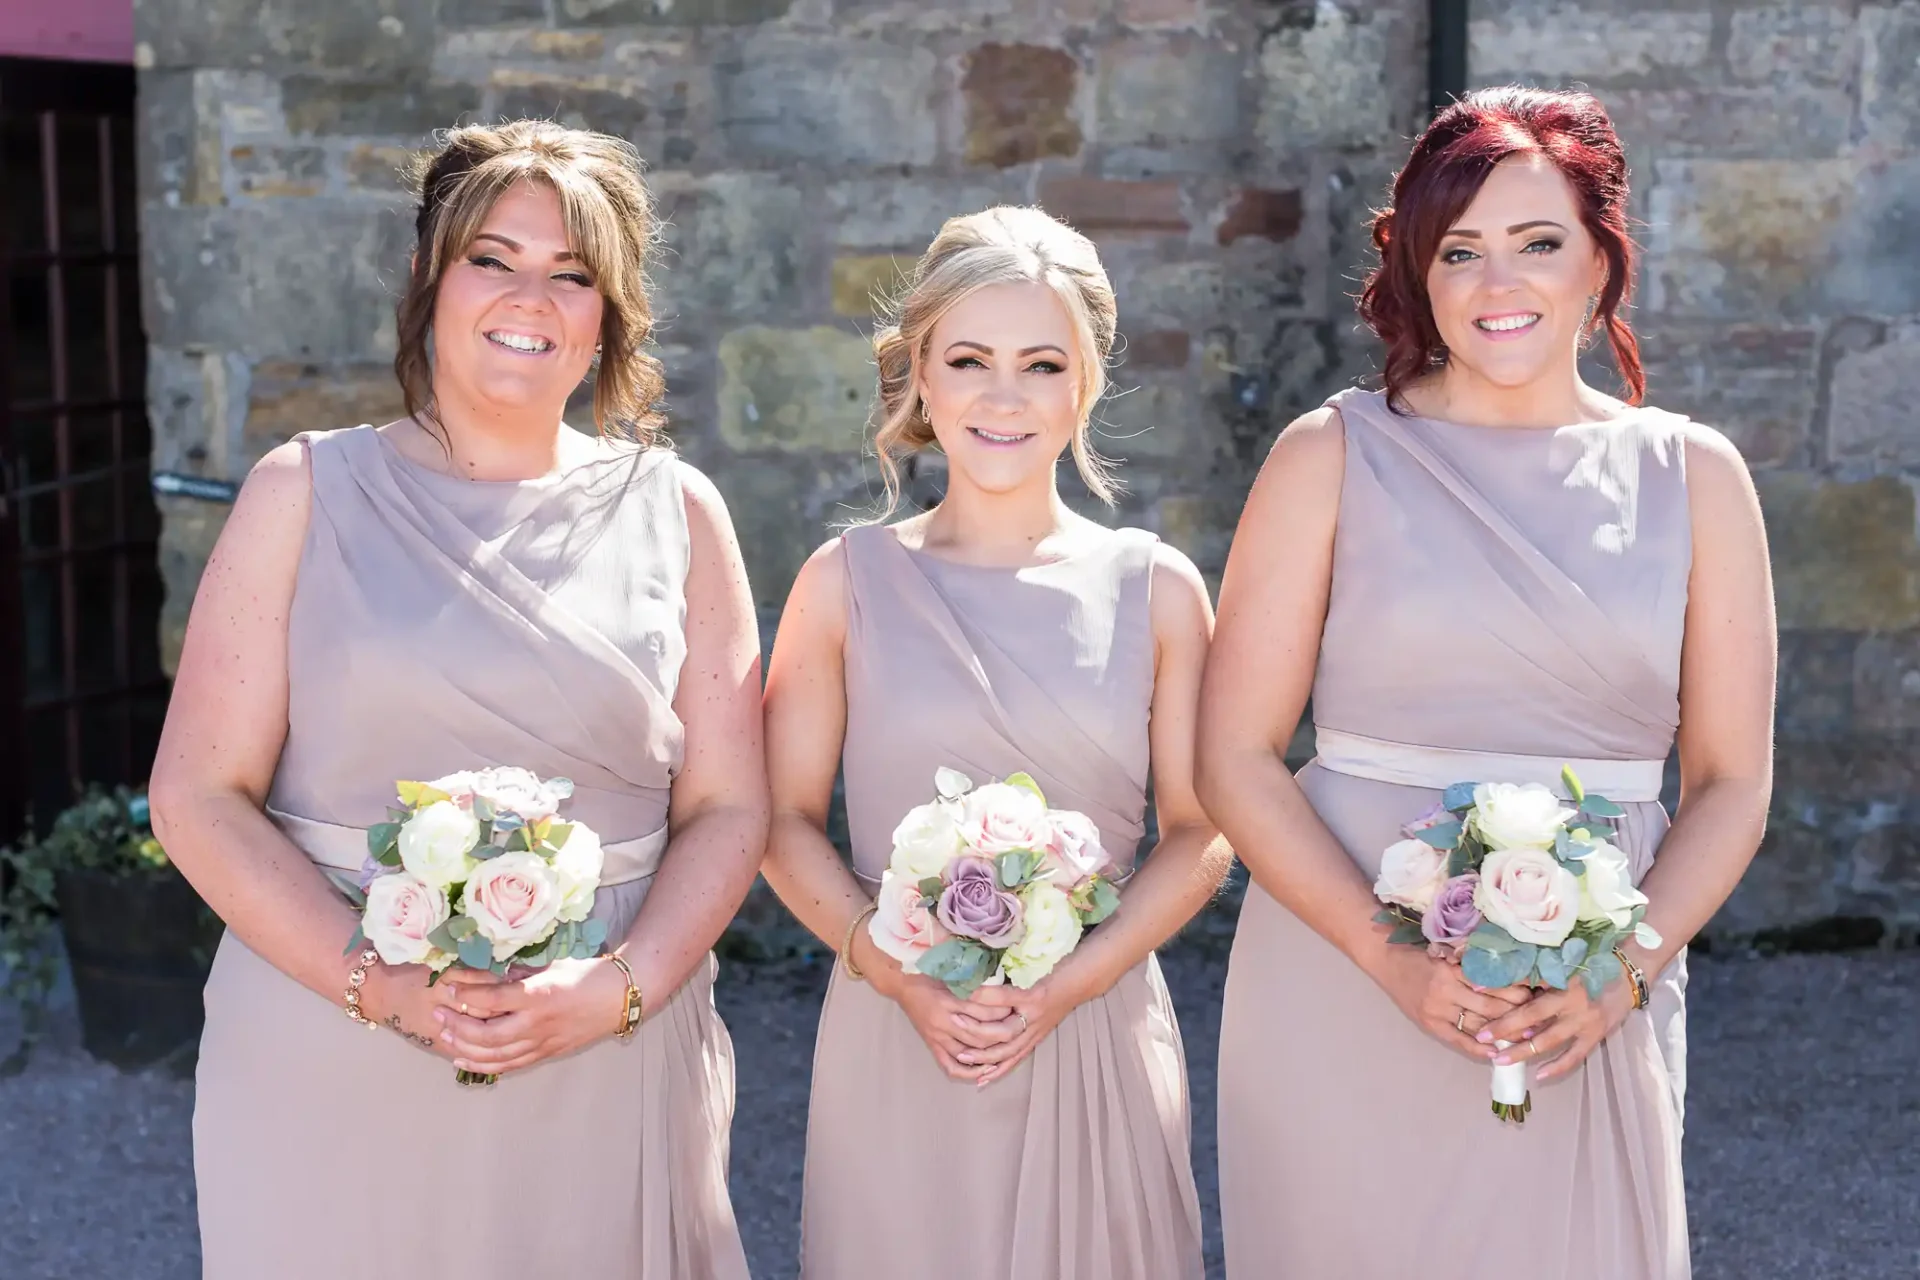 Three bridesmaids in matching taupe dresses holding bouquets of pink and white roses stand smiling outside a stone building.